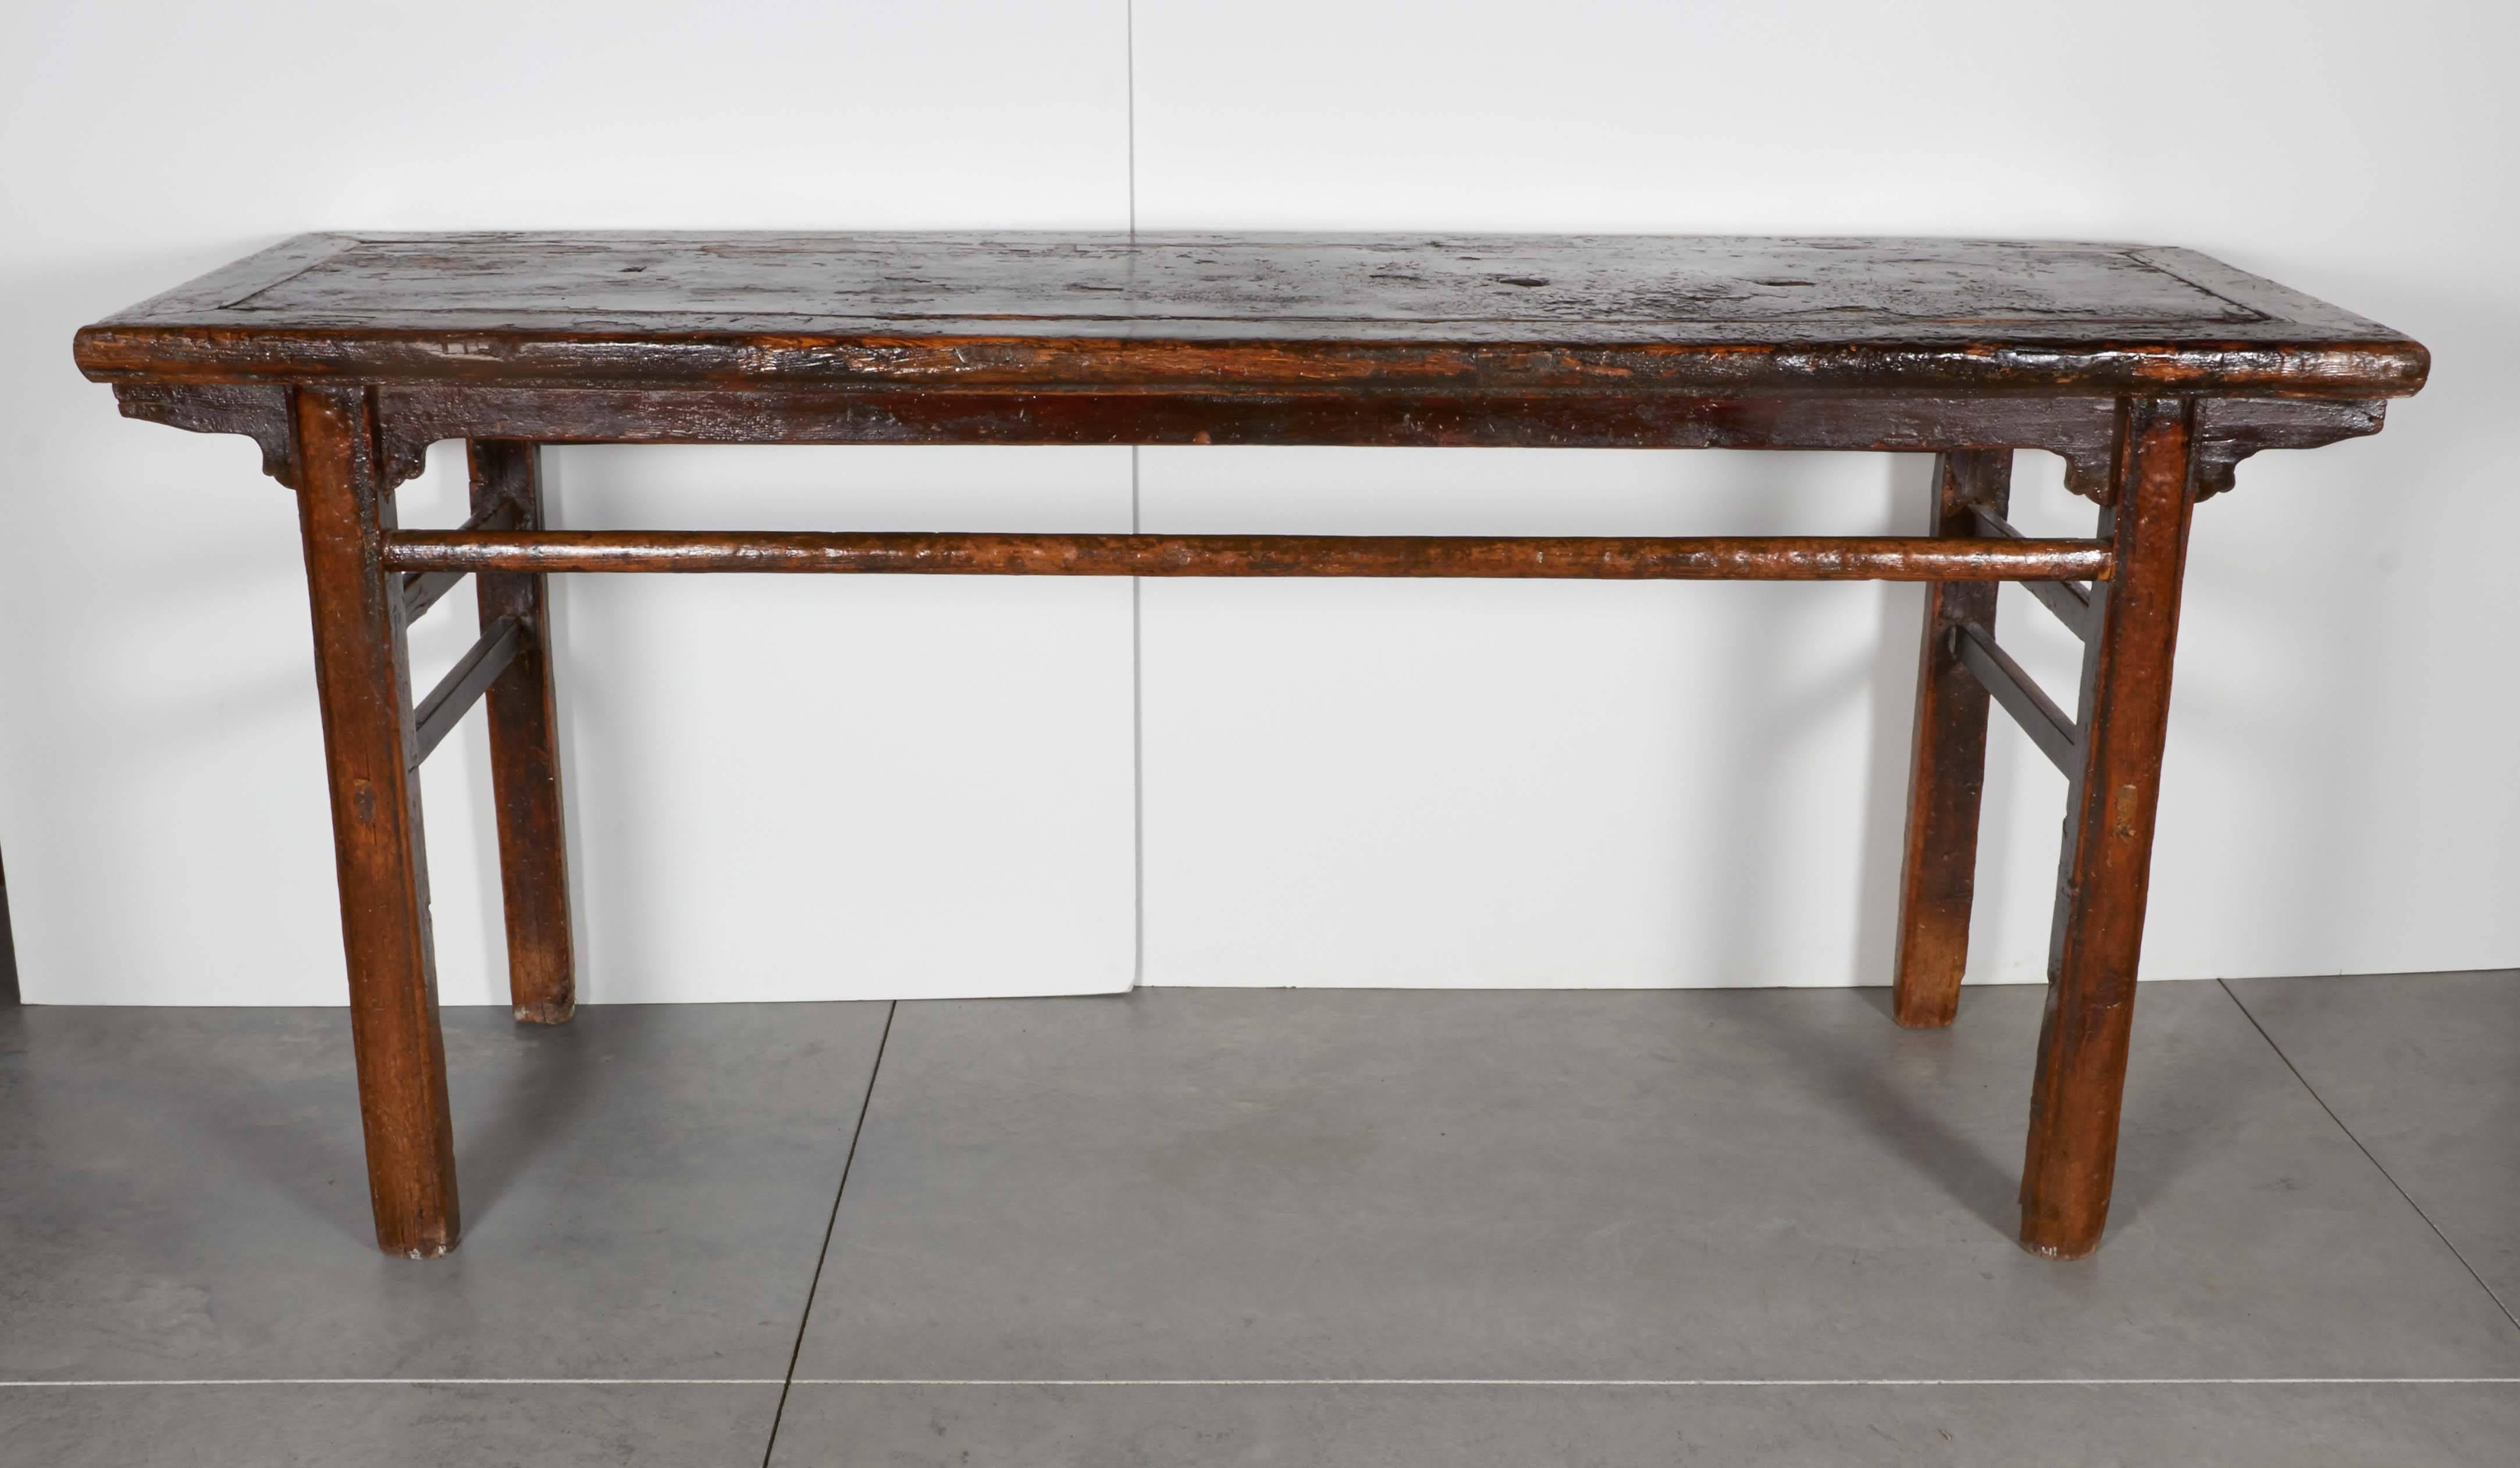 Heavily Lacquered Rustic Antique Painting Table 3